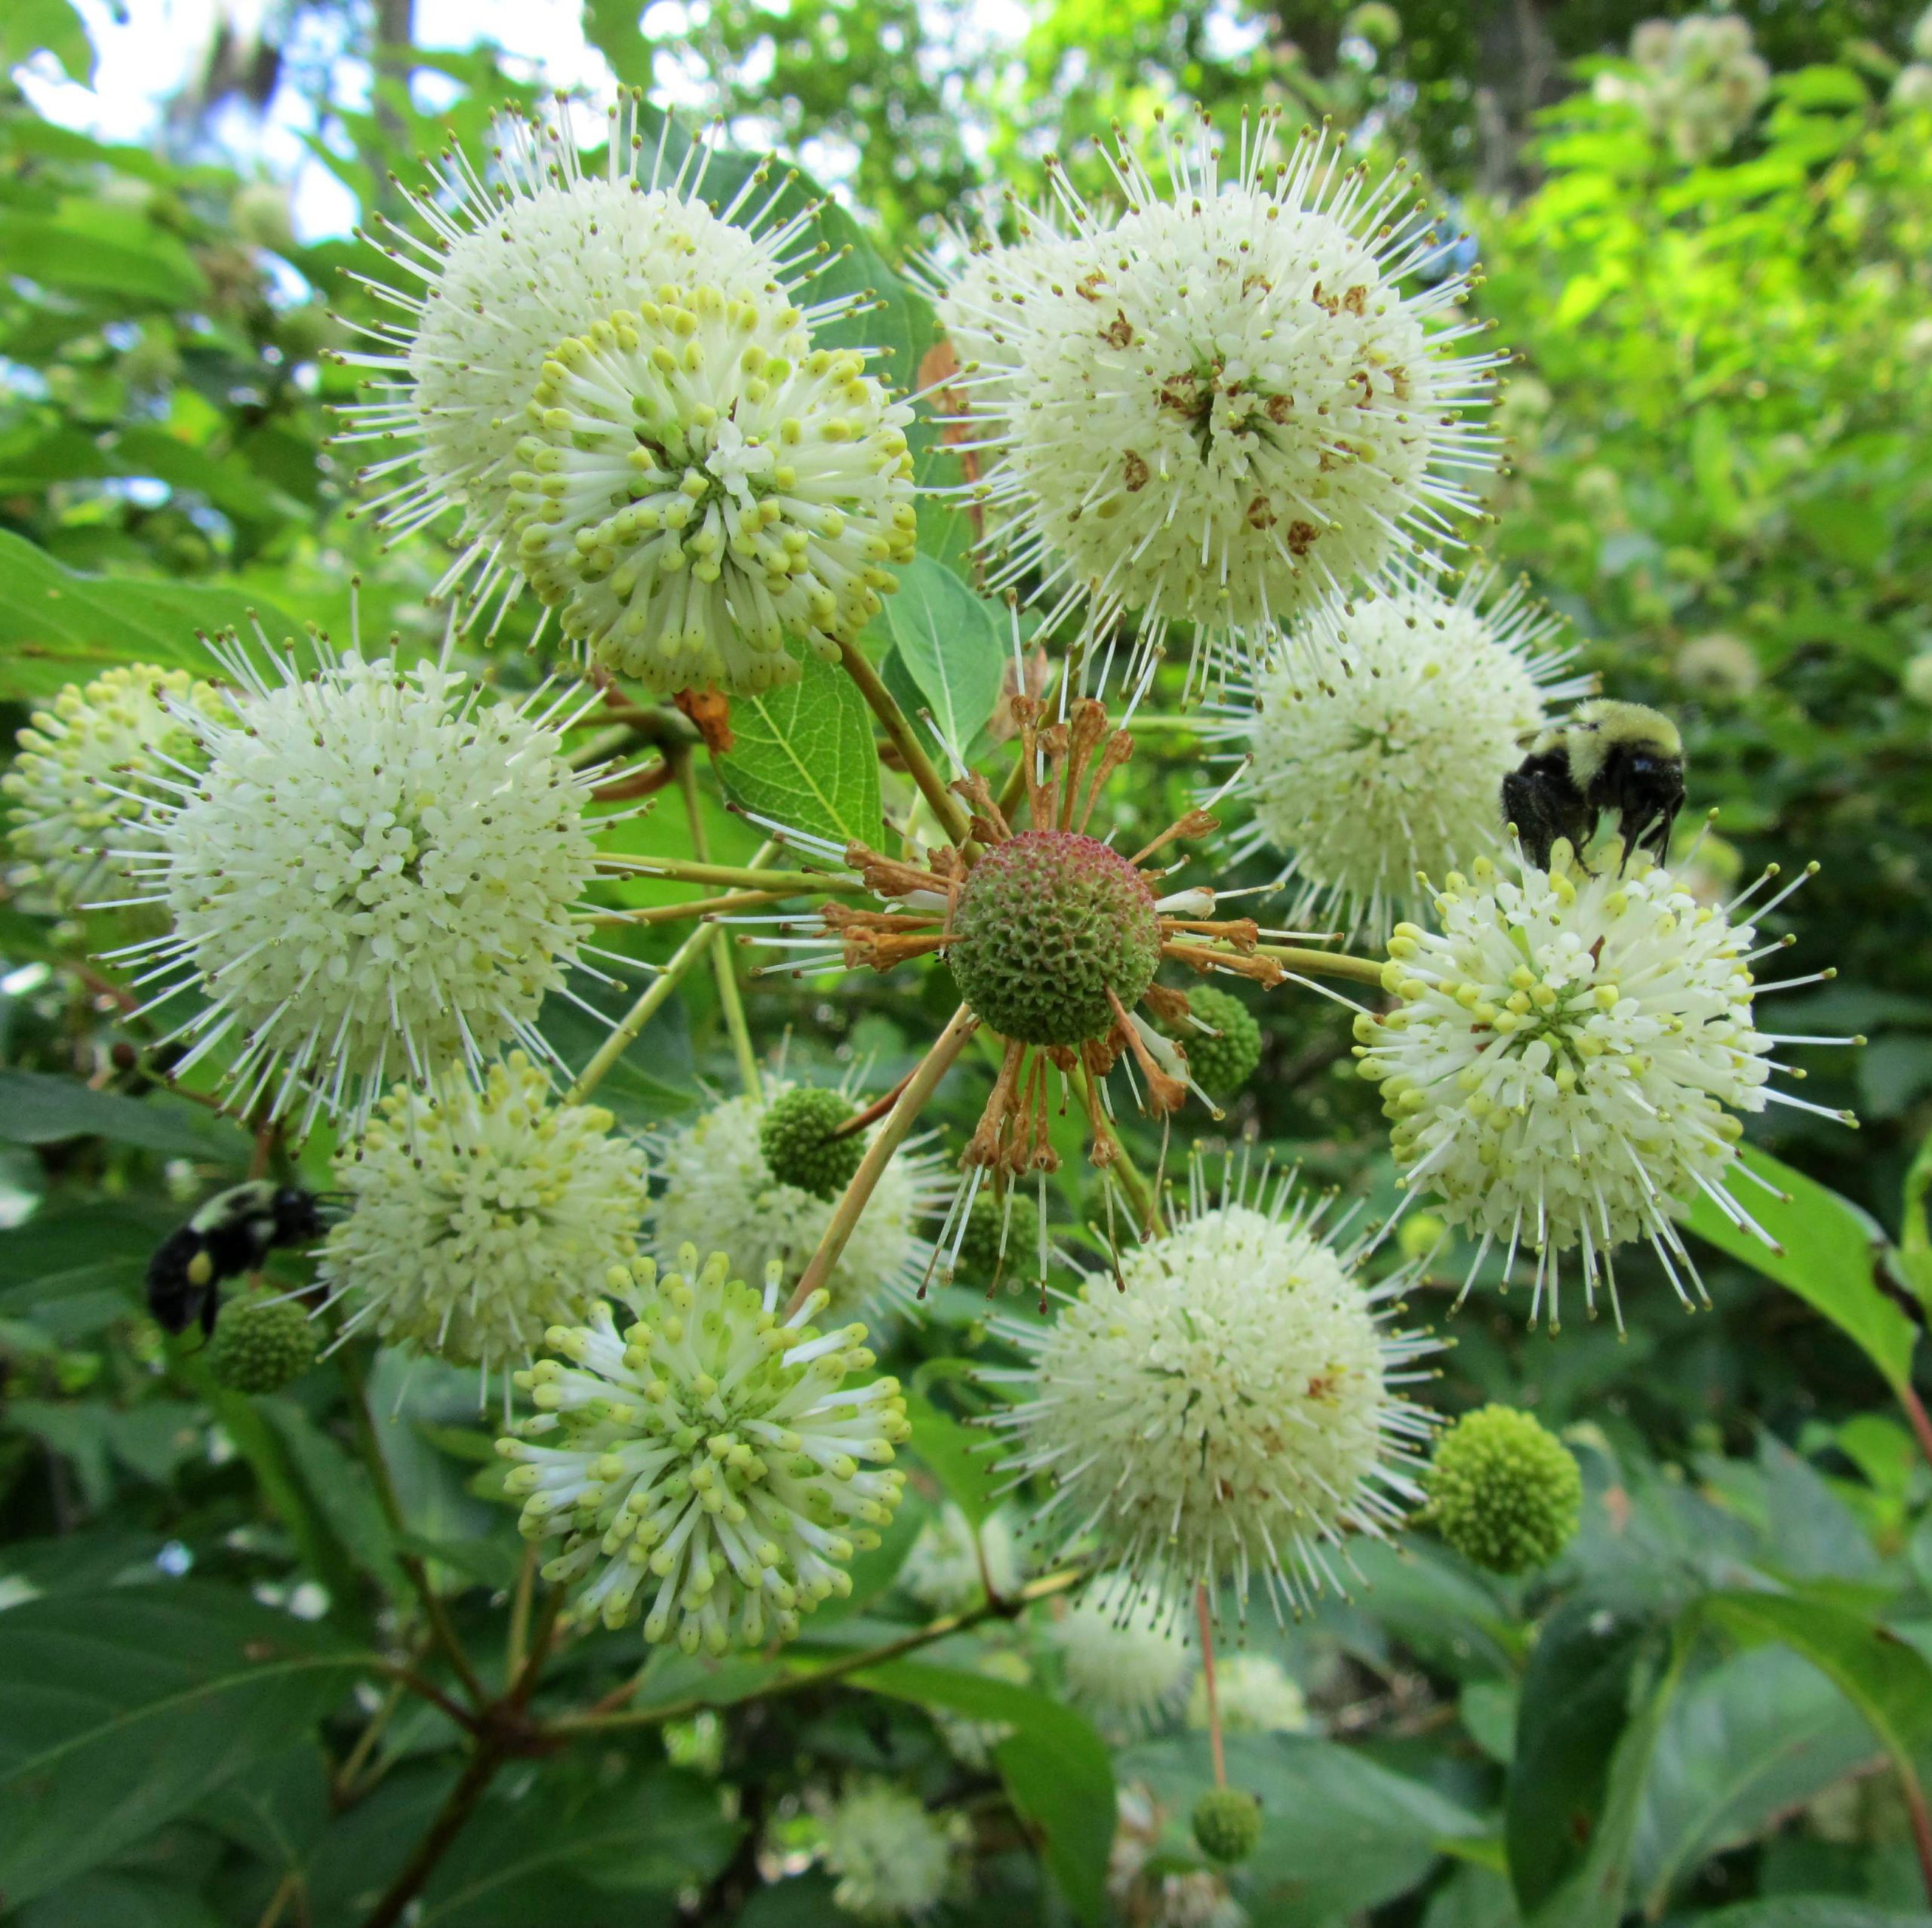 Image of Buttonbush bush with white flowers